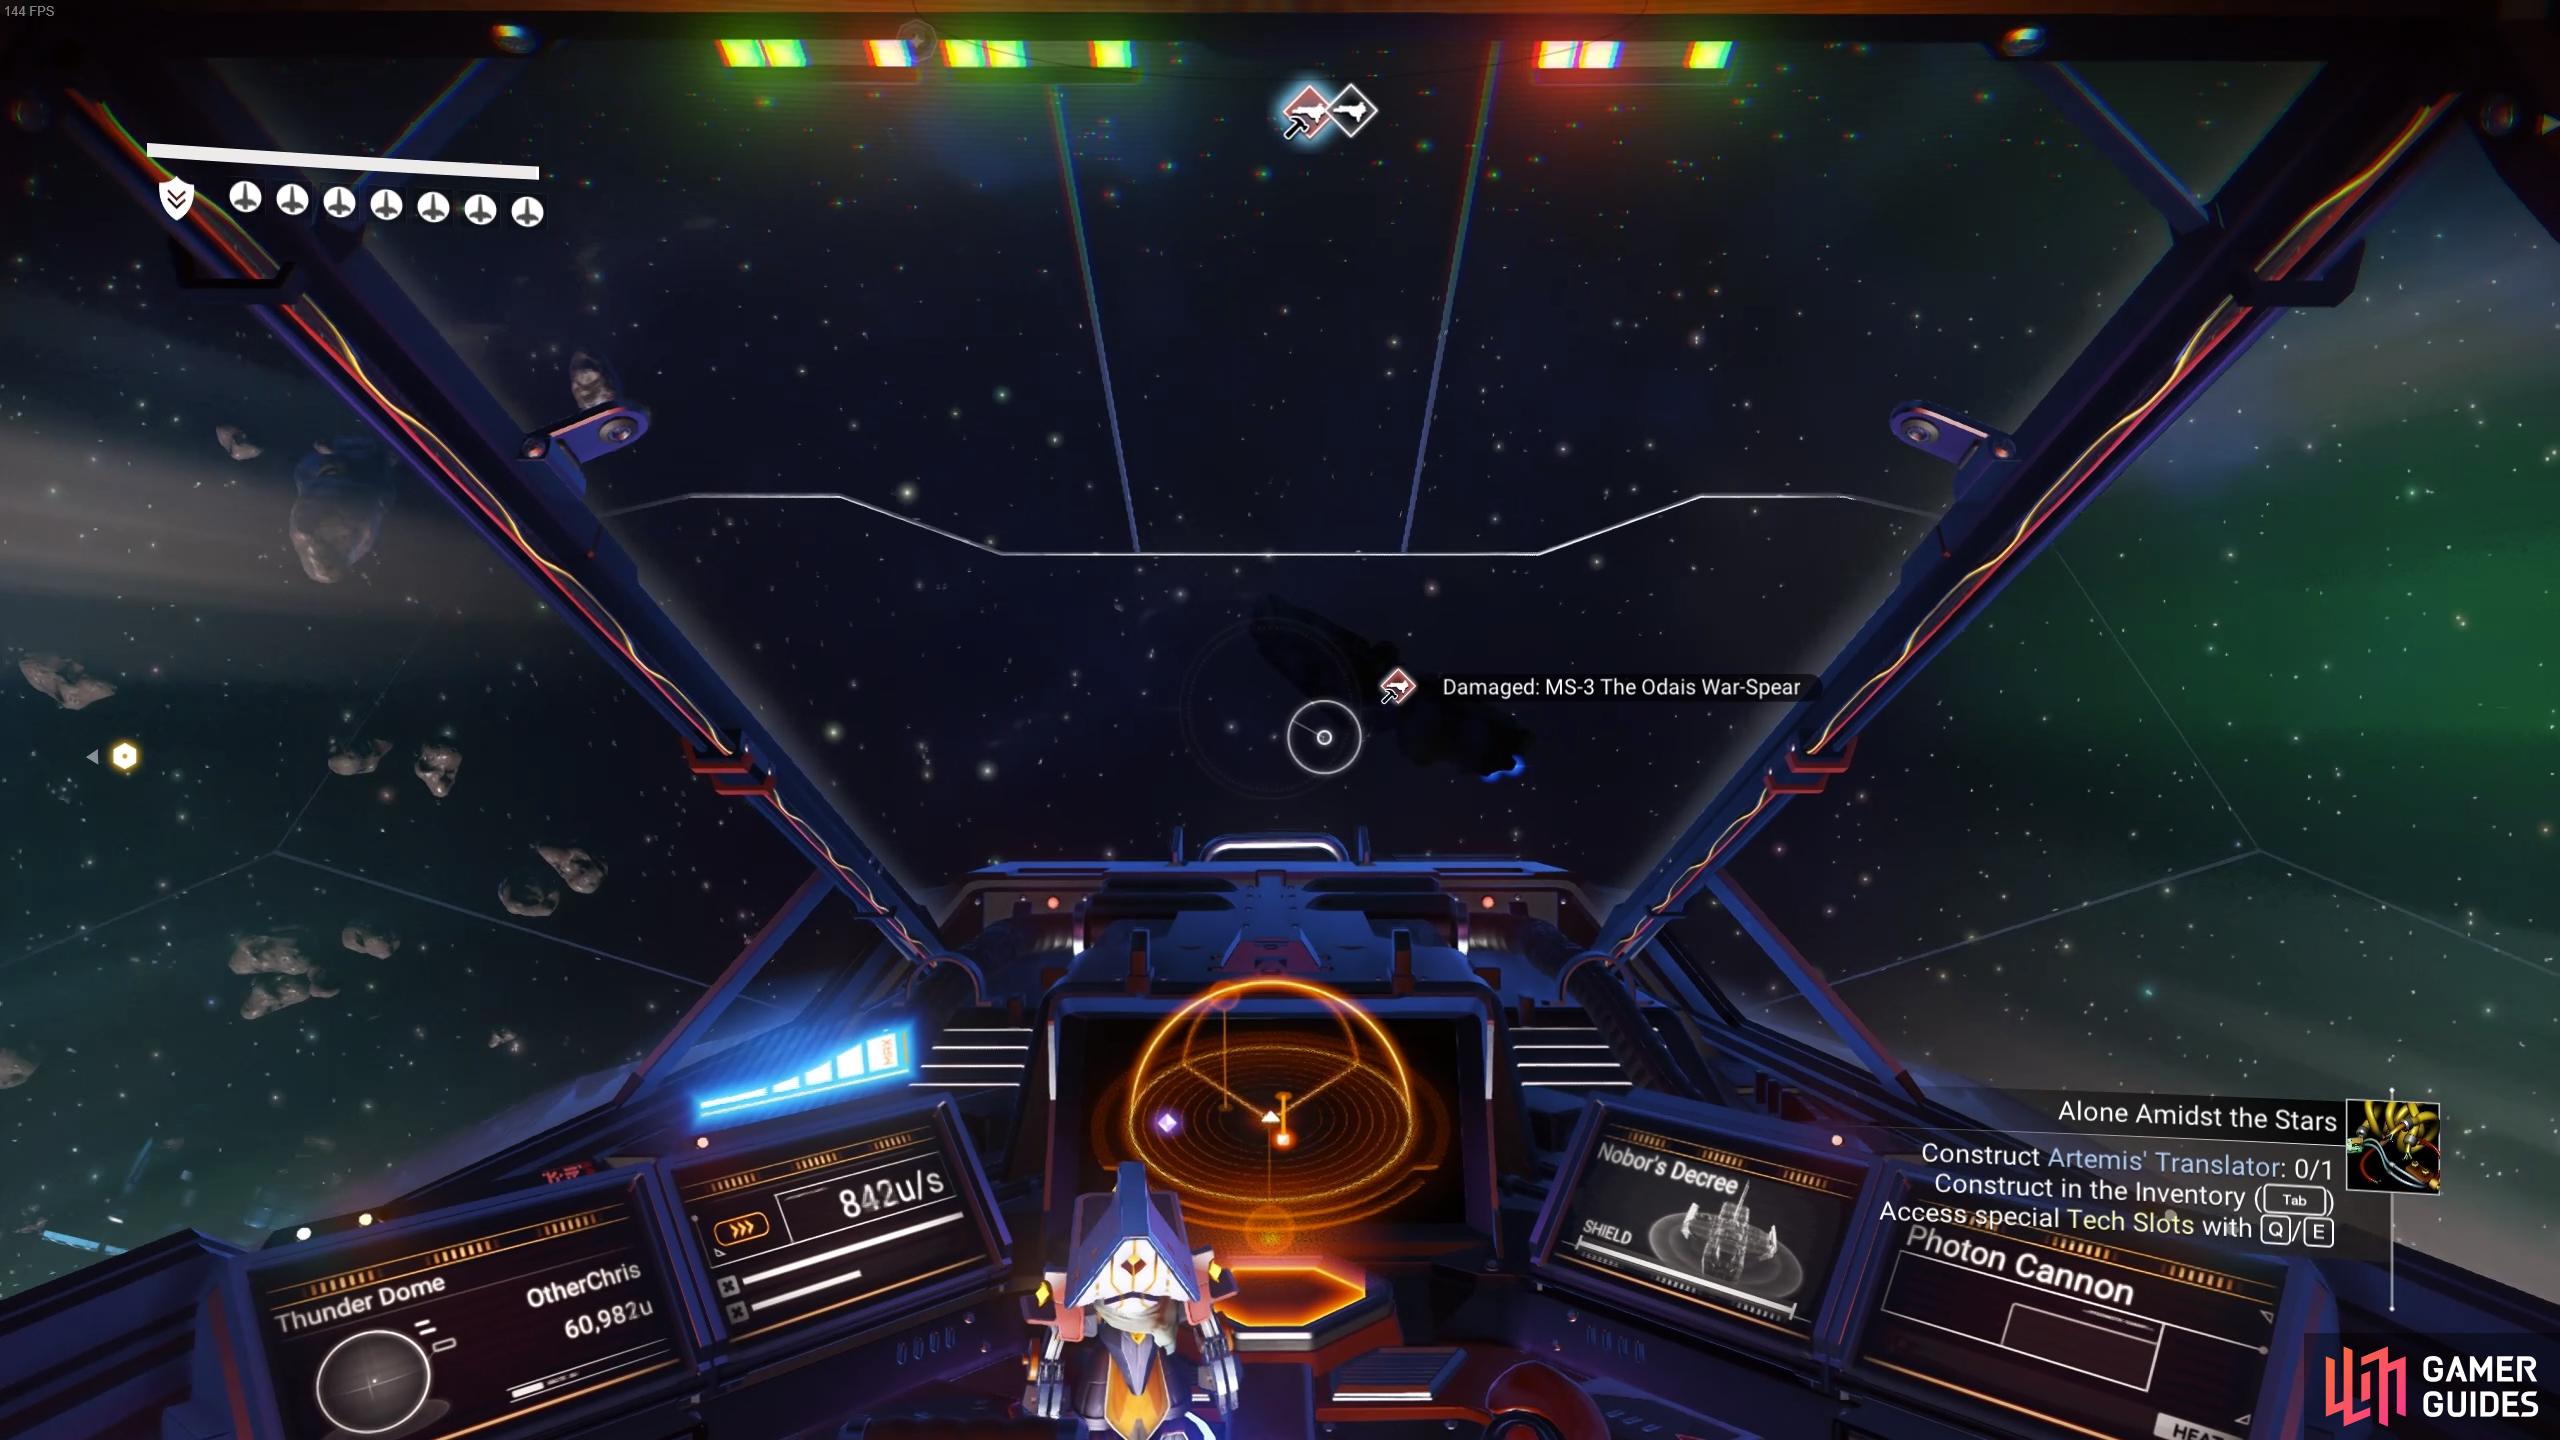 You can identify damaged Frigates in your fleet by flying near them and looking for this red icon.